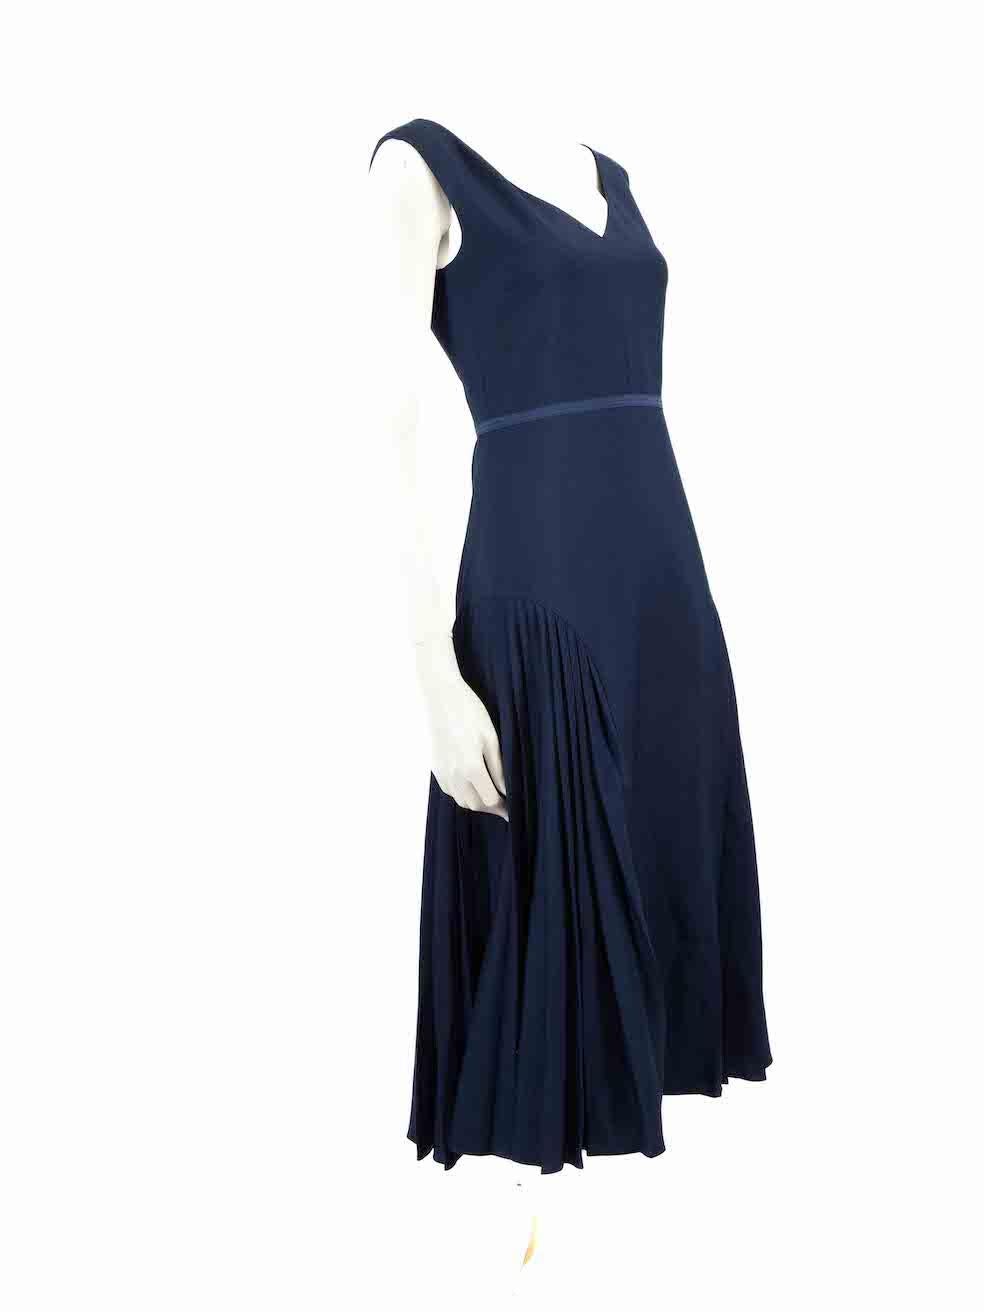 CONDITION is Very good. Hardly any visible wear to dress is evident on this used Fendi designer resale item.
 
 
 
 Details
 
 
 Navy
 
 Wool
 
 Dress
 
 Sleeveless
 
 Midi
 
 V-neck
 
 Pleated skirt detail
 
 Back zip and hook fastening
 
 
 
 
 
